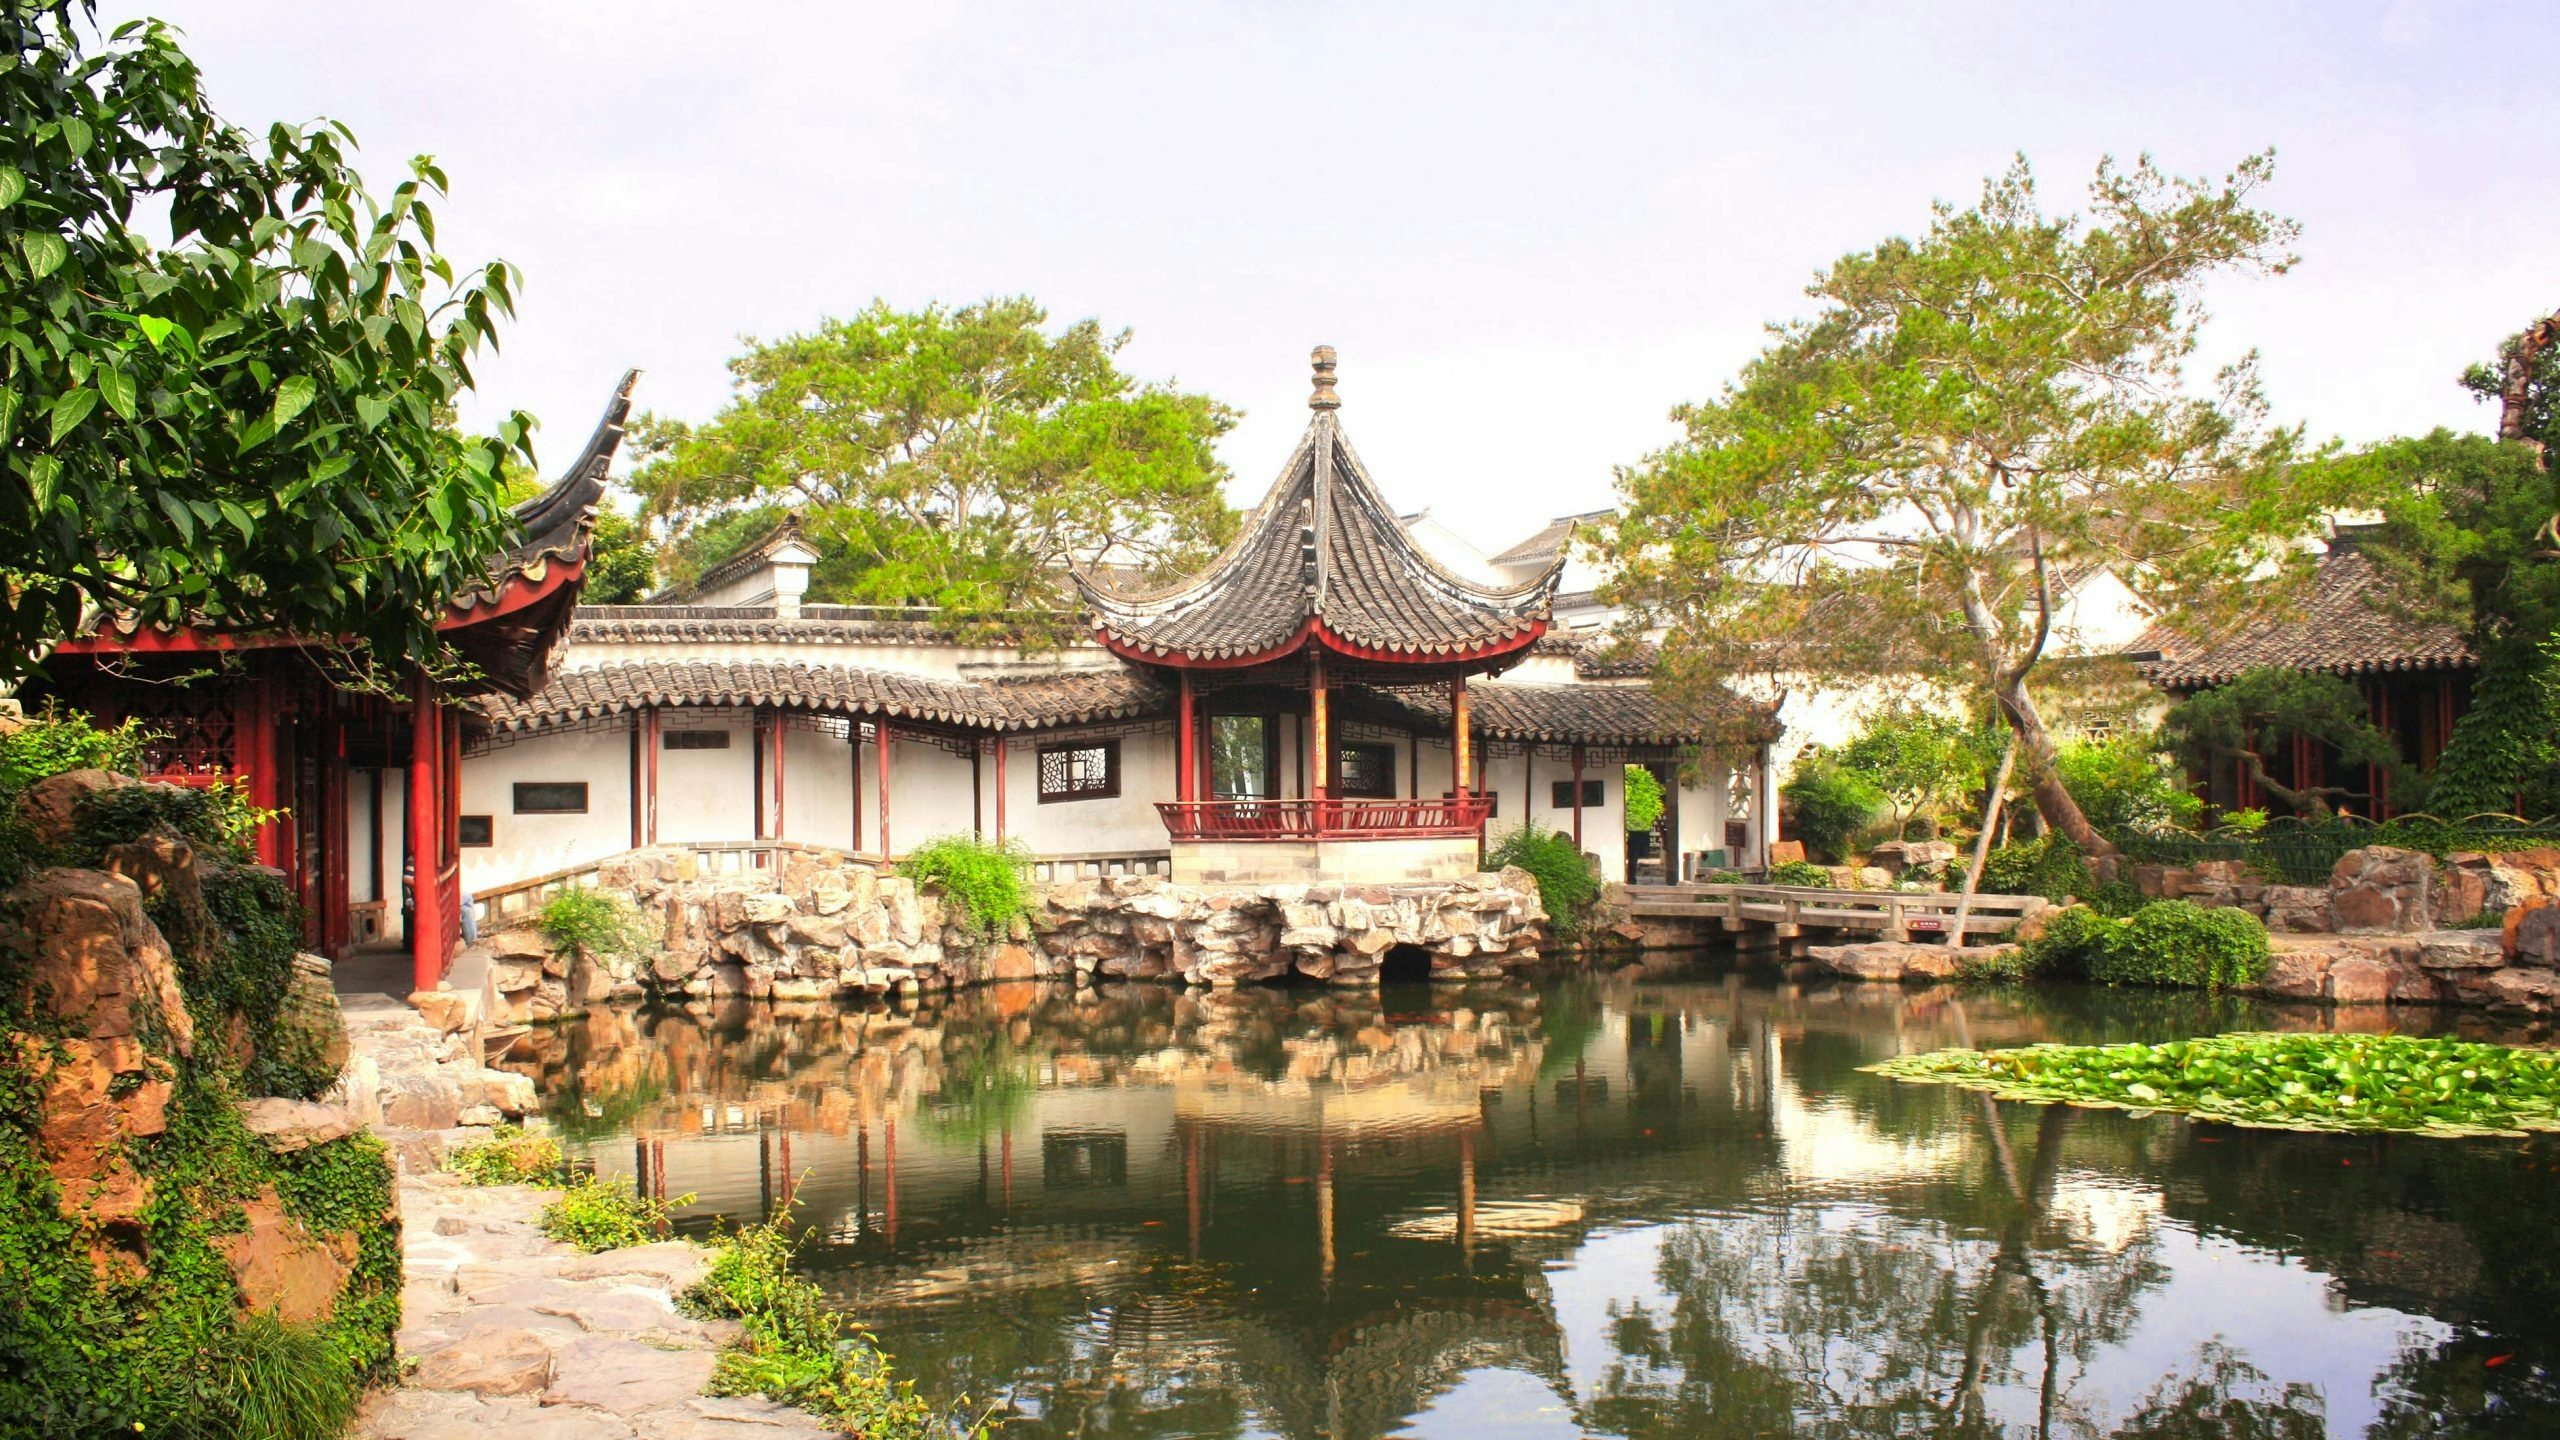 With a high GDP and well-developed infrastructure, Suzhou is an intersection of heritage and modernity. Does the picturesque city next to Shanghai deserve luxury brands’ attention?  Photo: Shutterstock